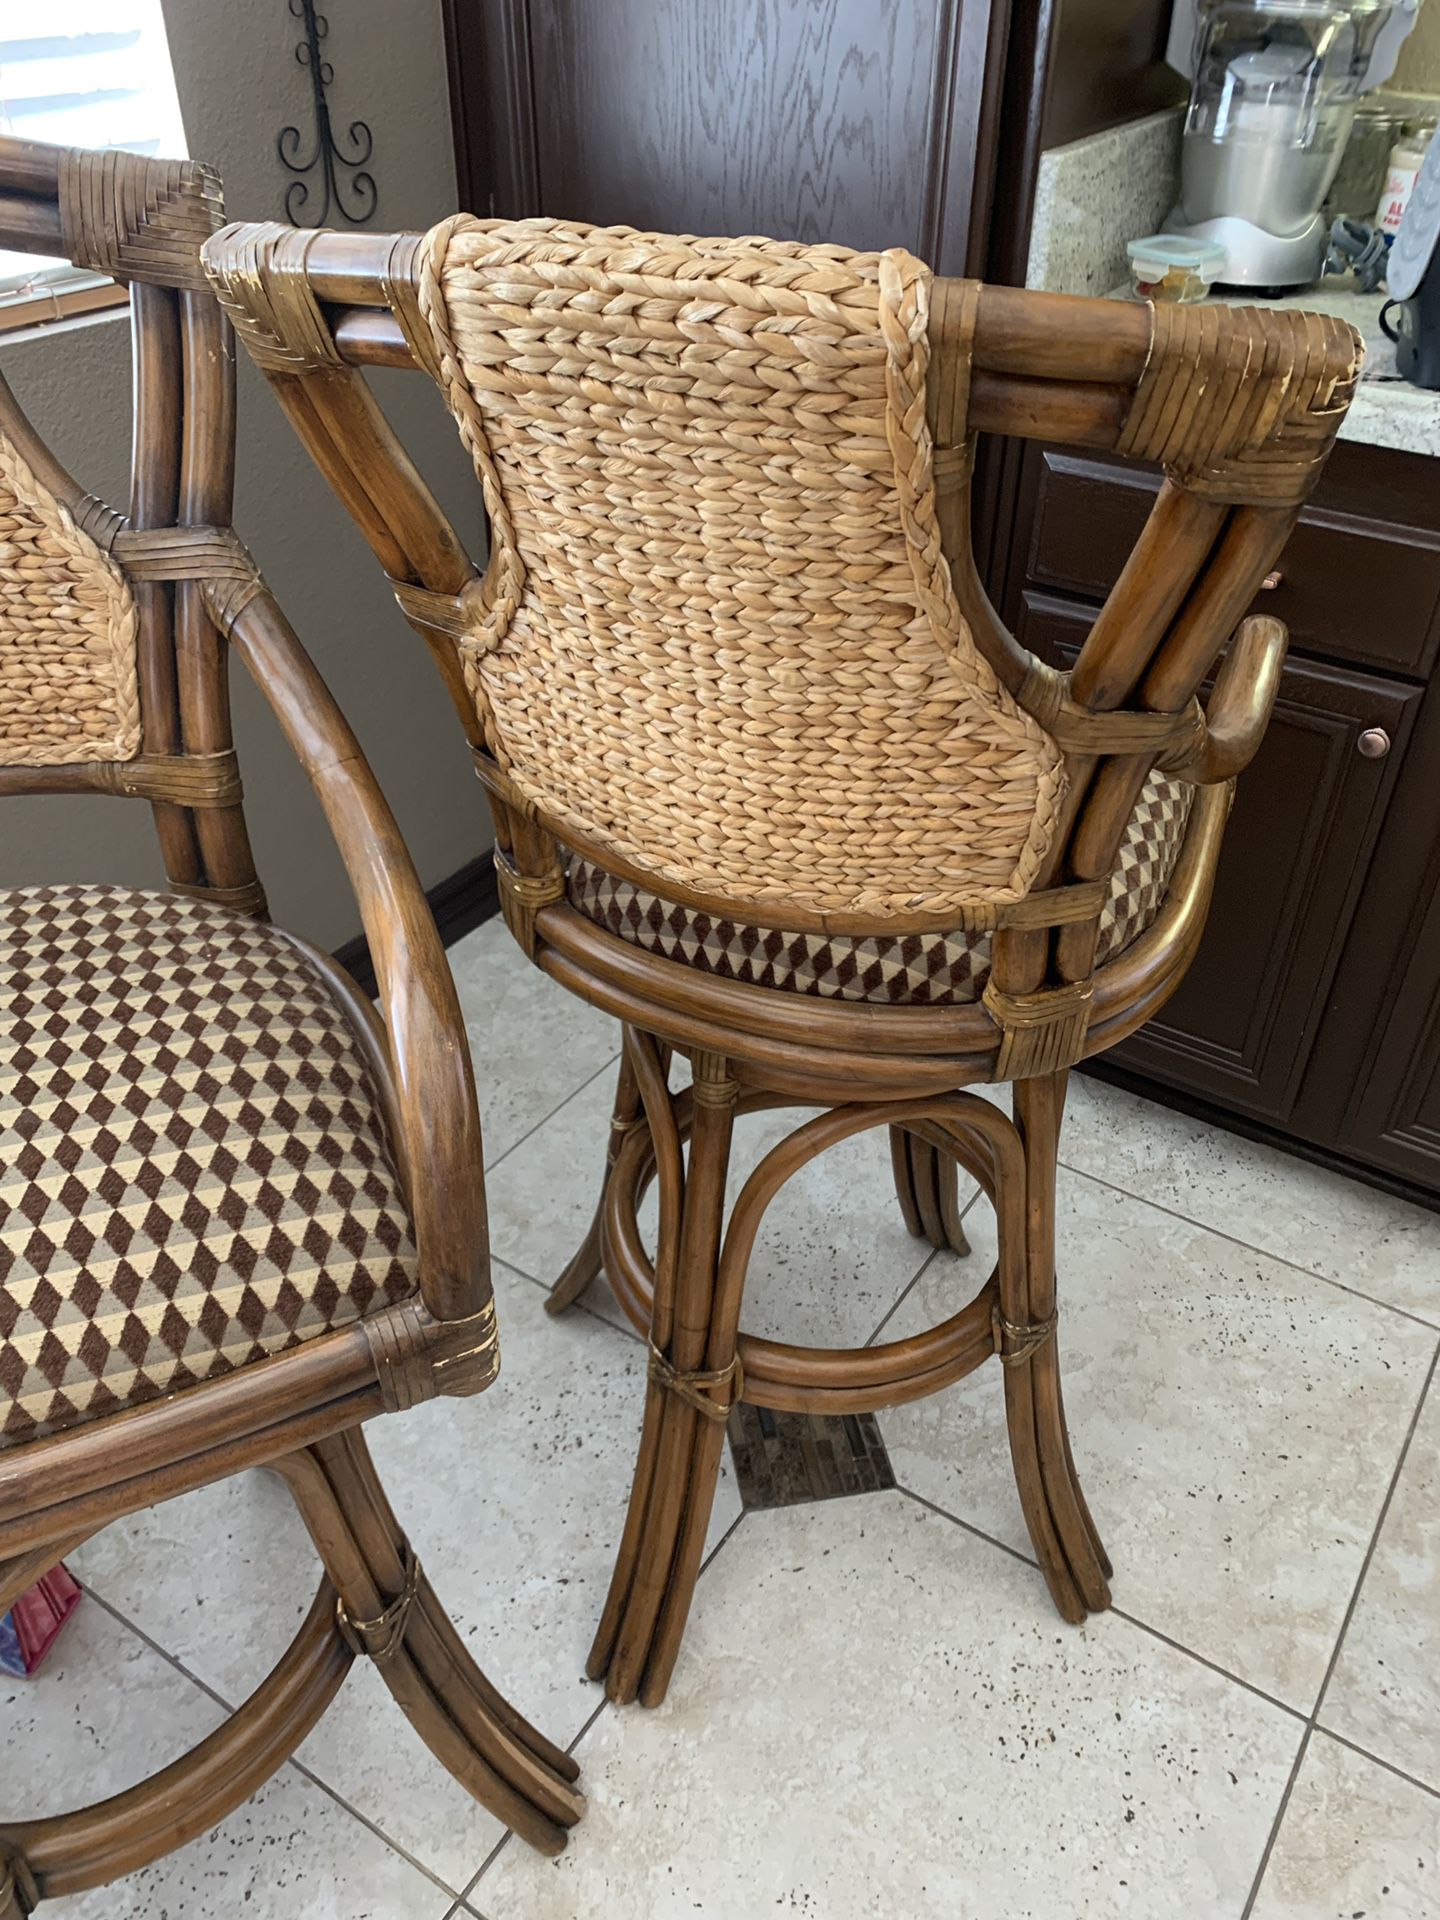 Stools for kitchen or bar